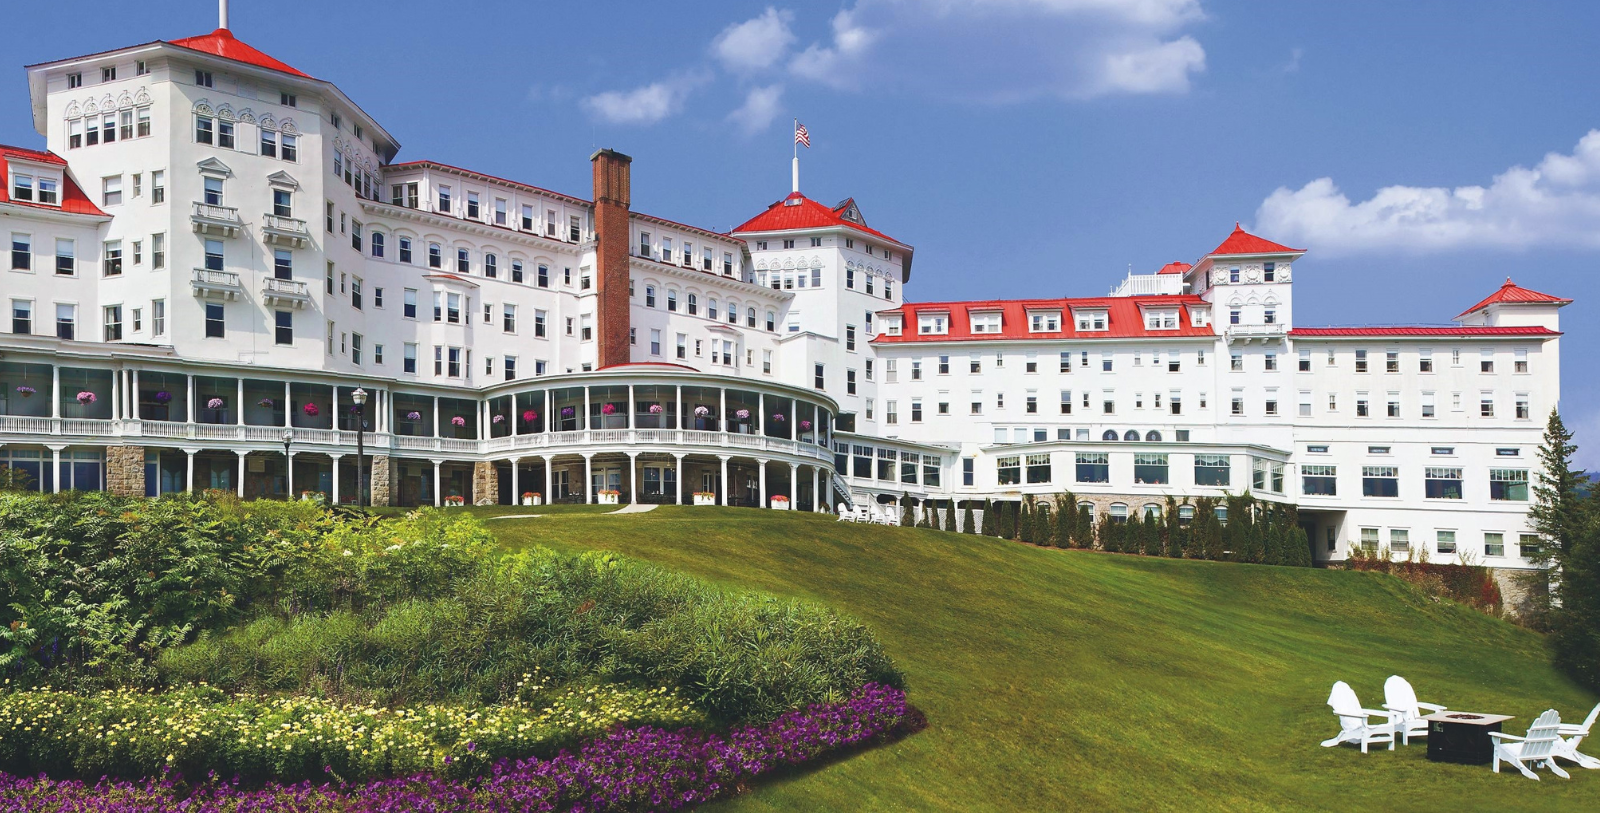 Image of Omni Mount Washington Resort, Bretton Woods, 1902, a member of Historic Hotels of America since 1989